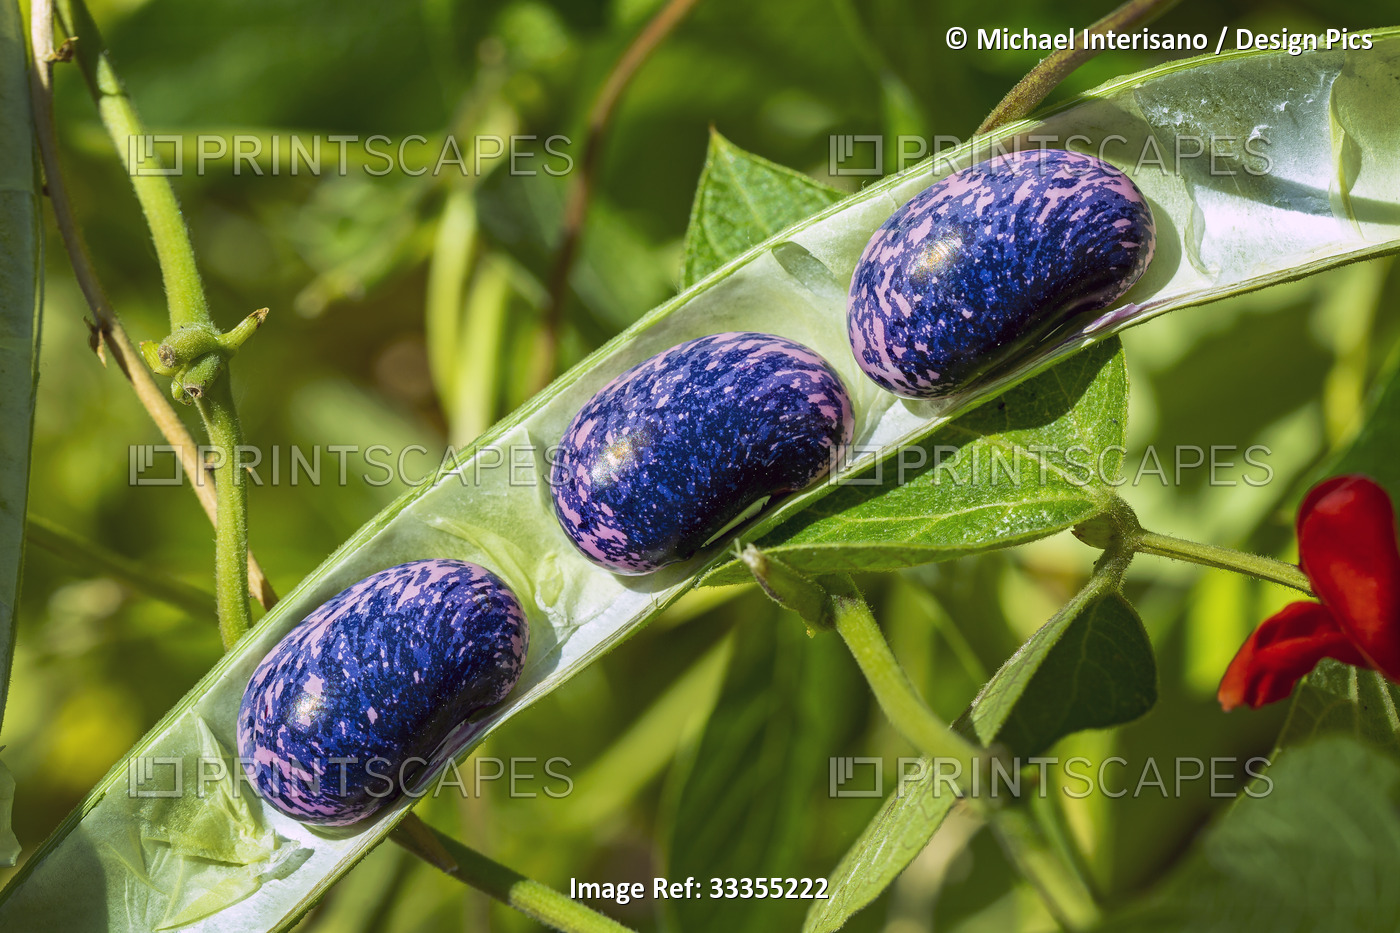 Close-up detail of scarlet runner beans (Phaseolus coccineus) inside their pod ...